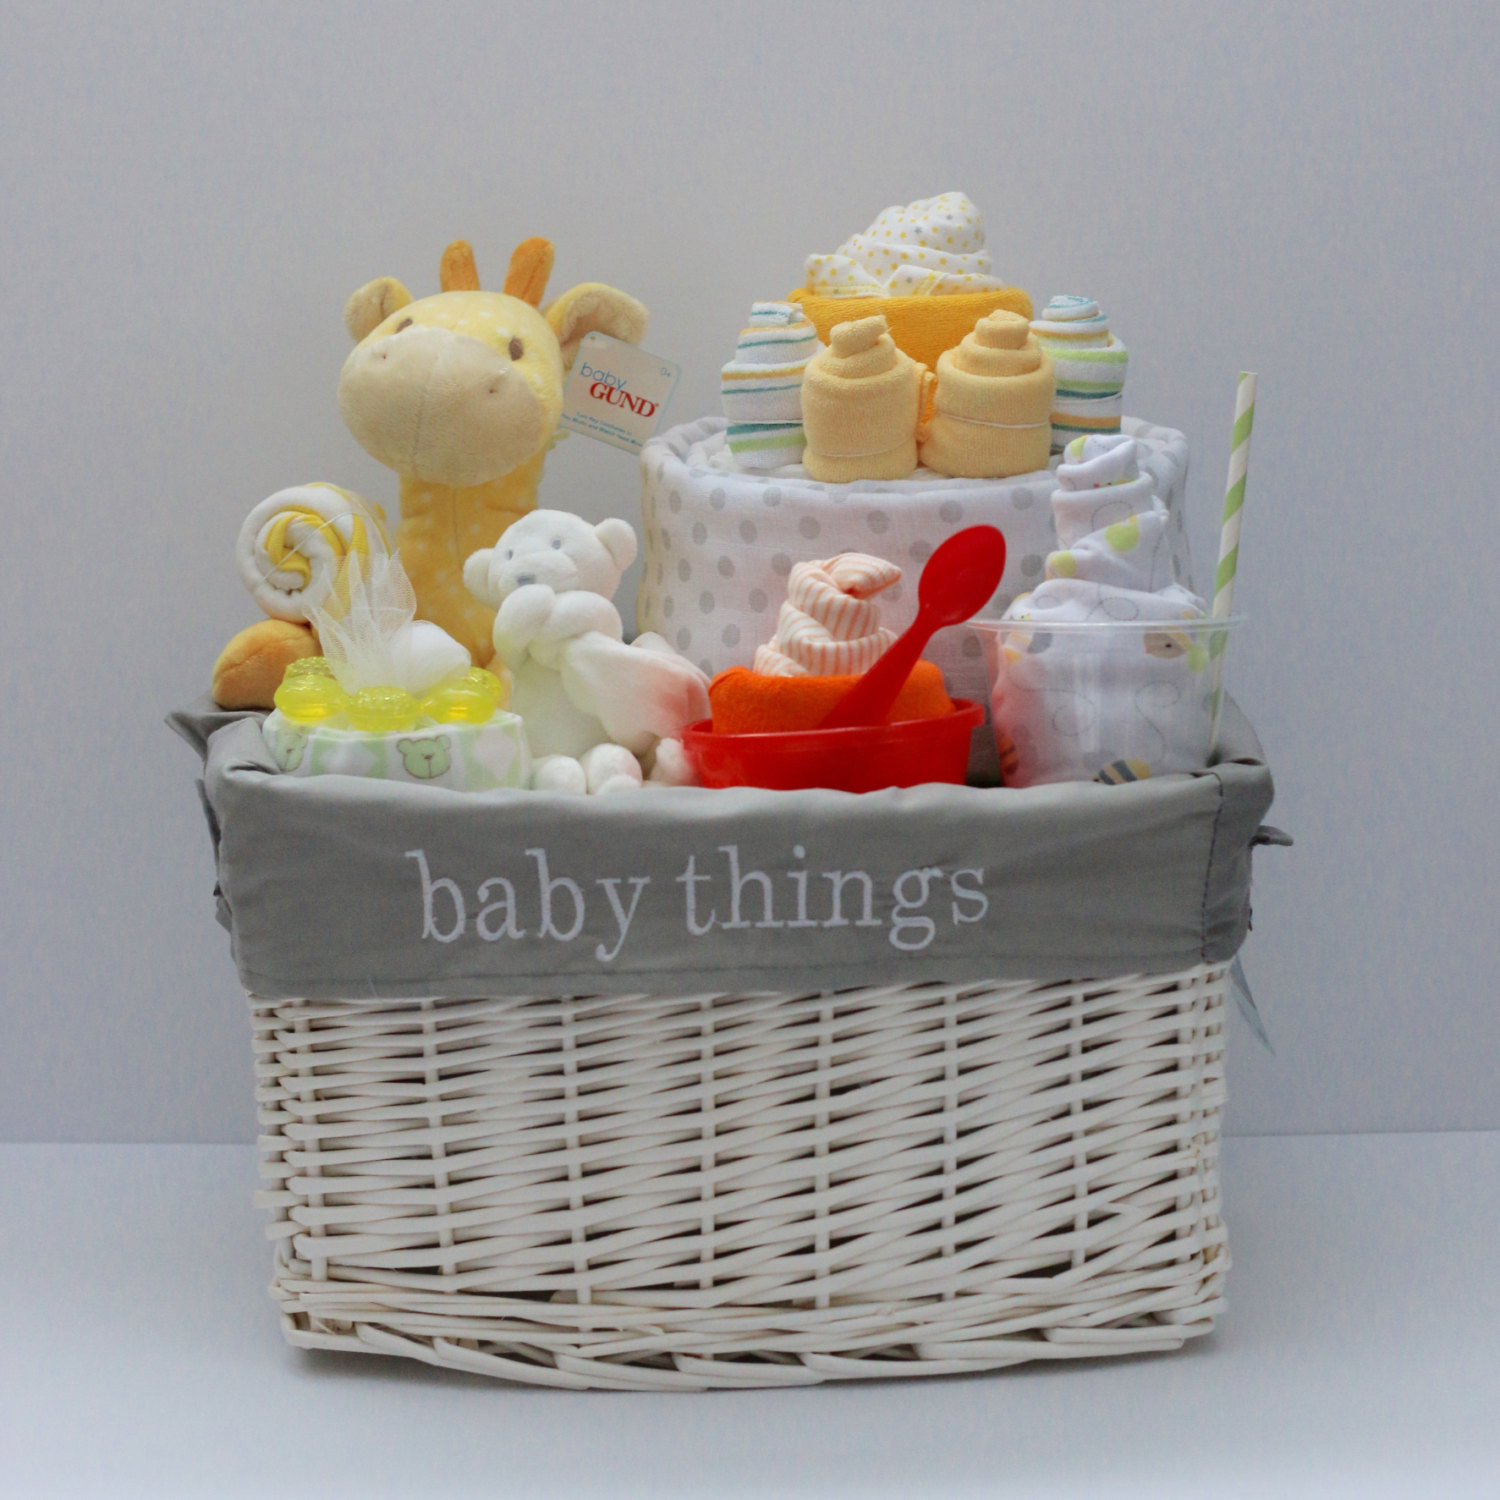 Unique New Baby Gifts
 Gender Neutral Baby Gift Basket Baby Shower Gift Unique Baby